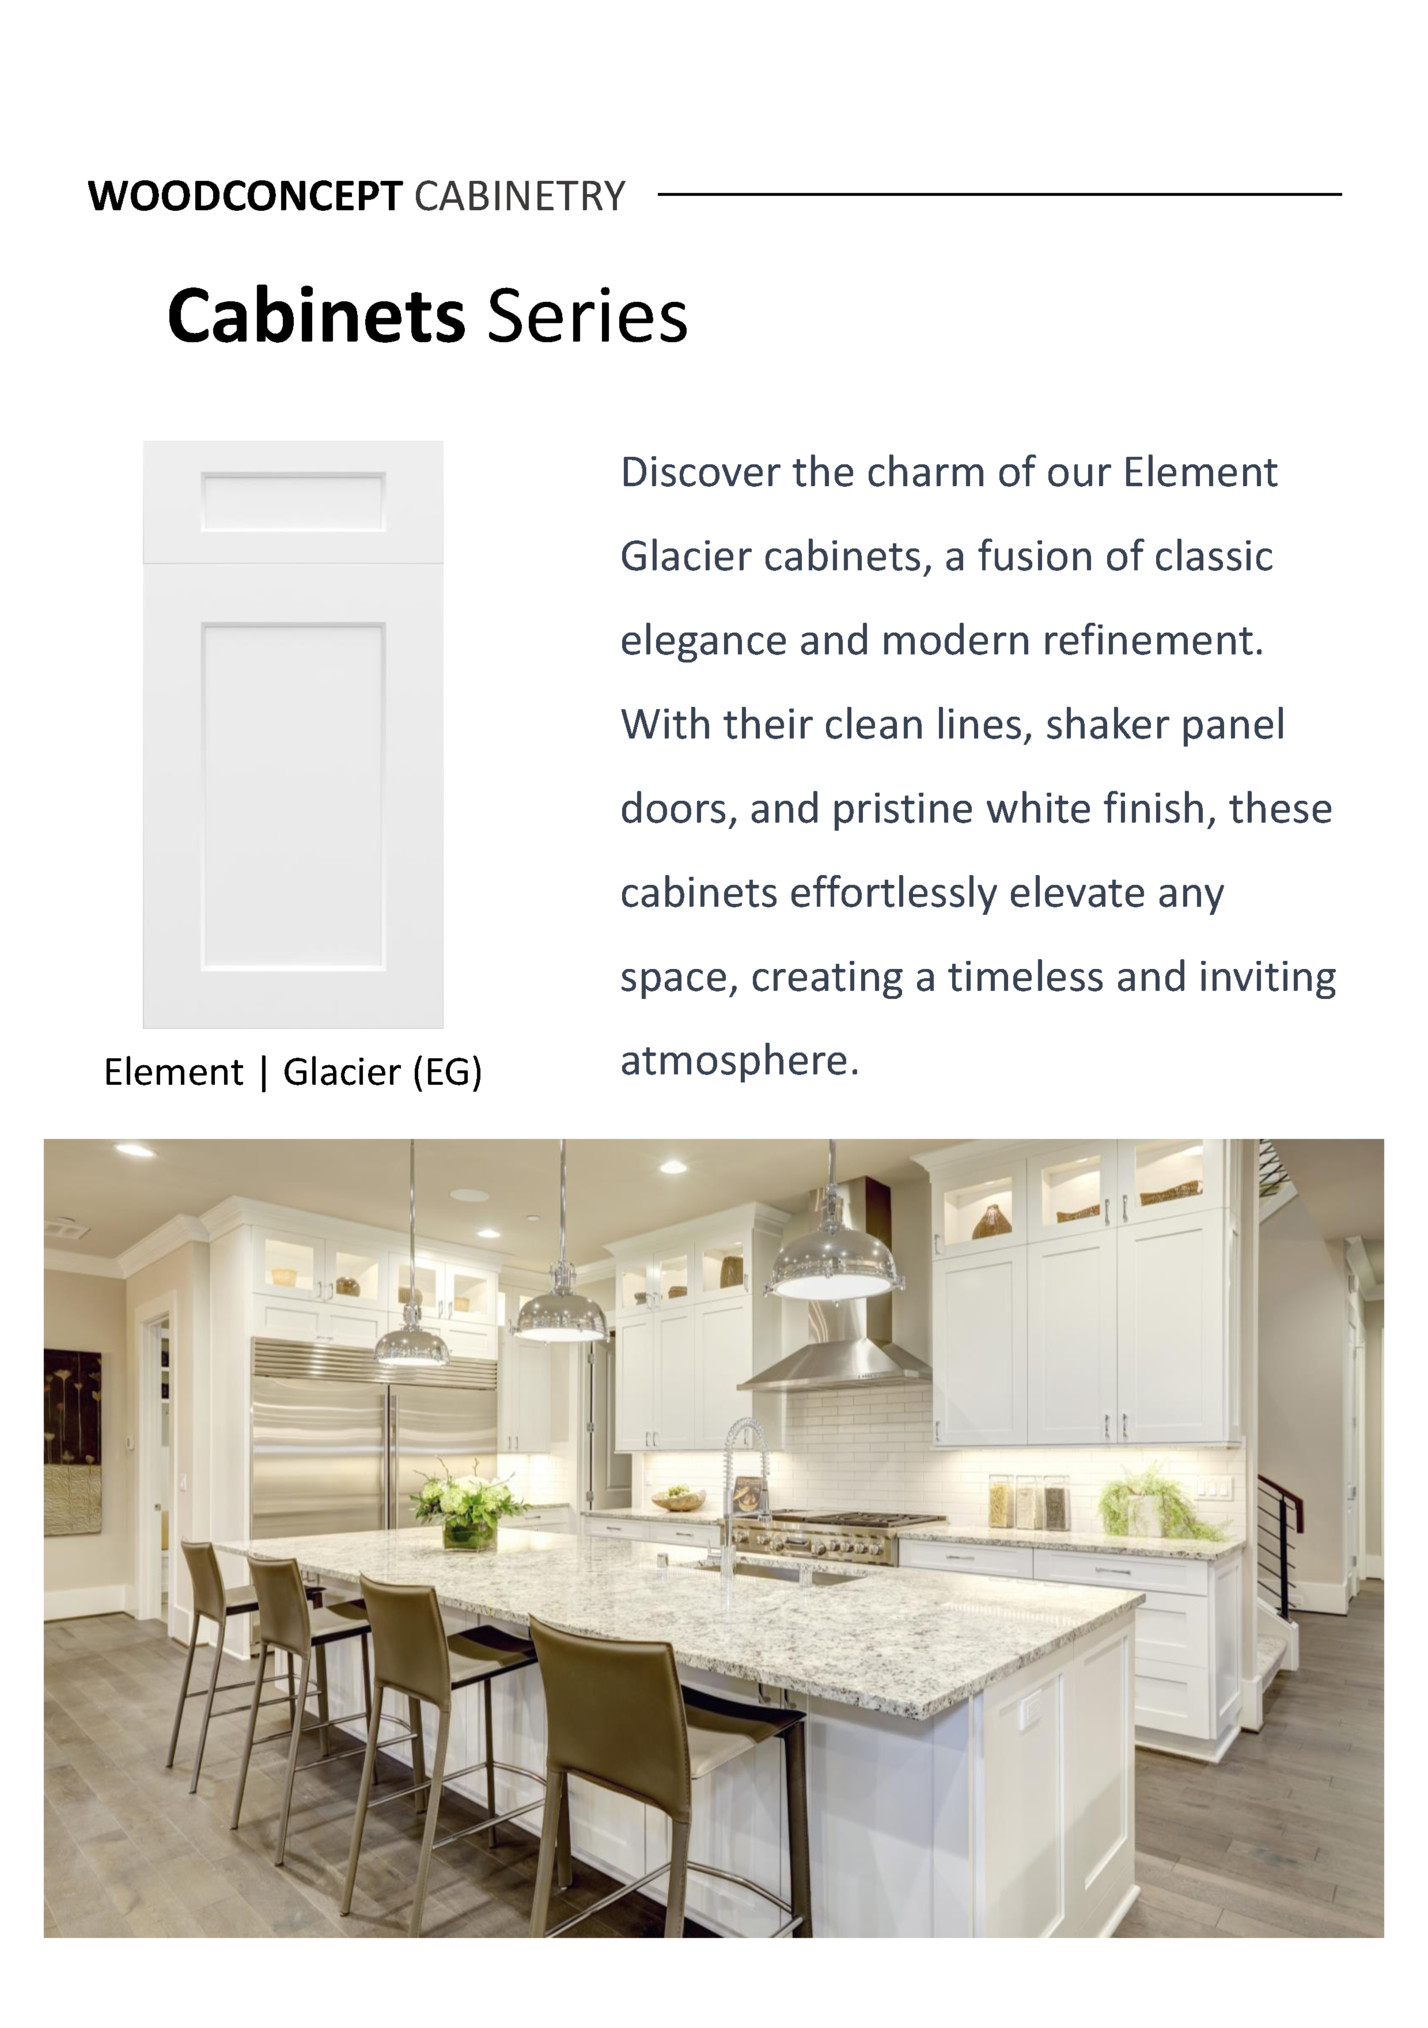 WOODCONCEPT CABINETRY